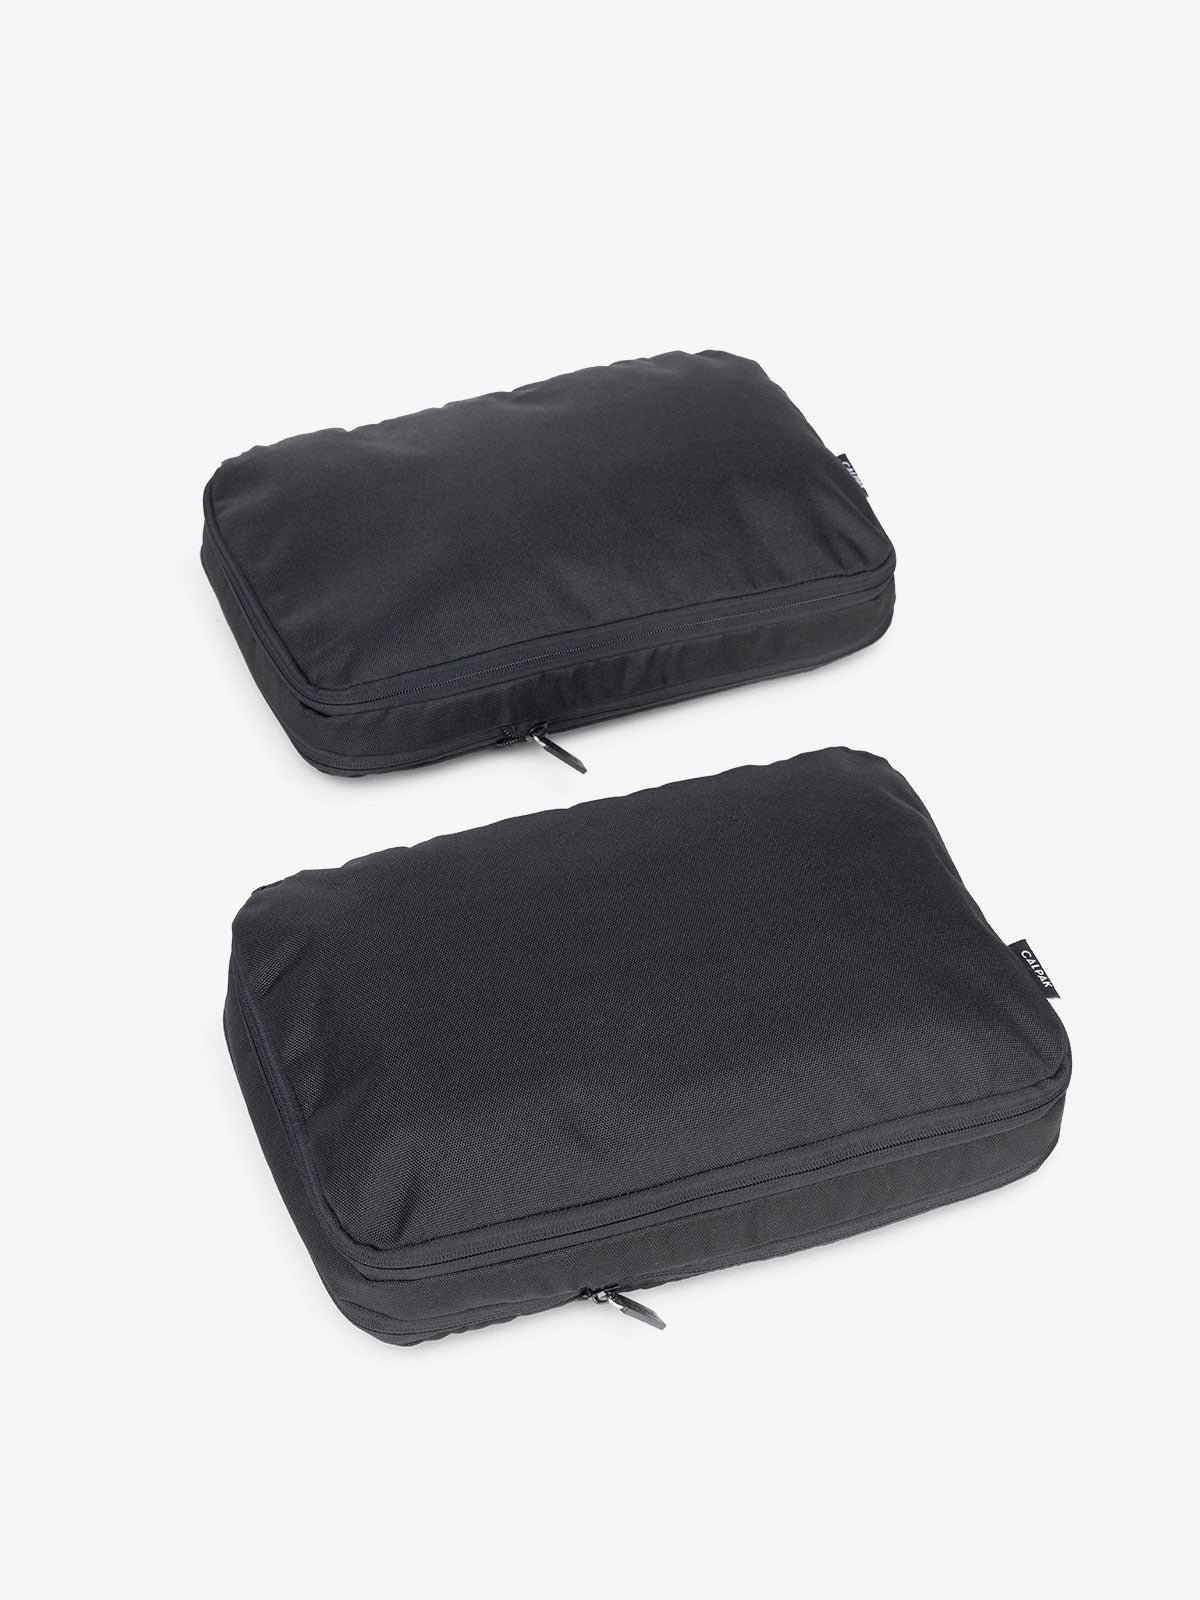 CALPAK compression packing cubes in black